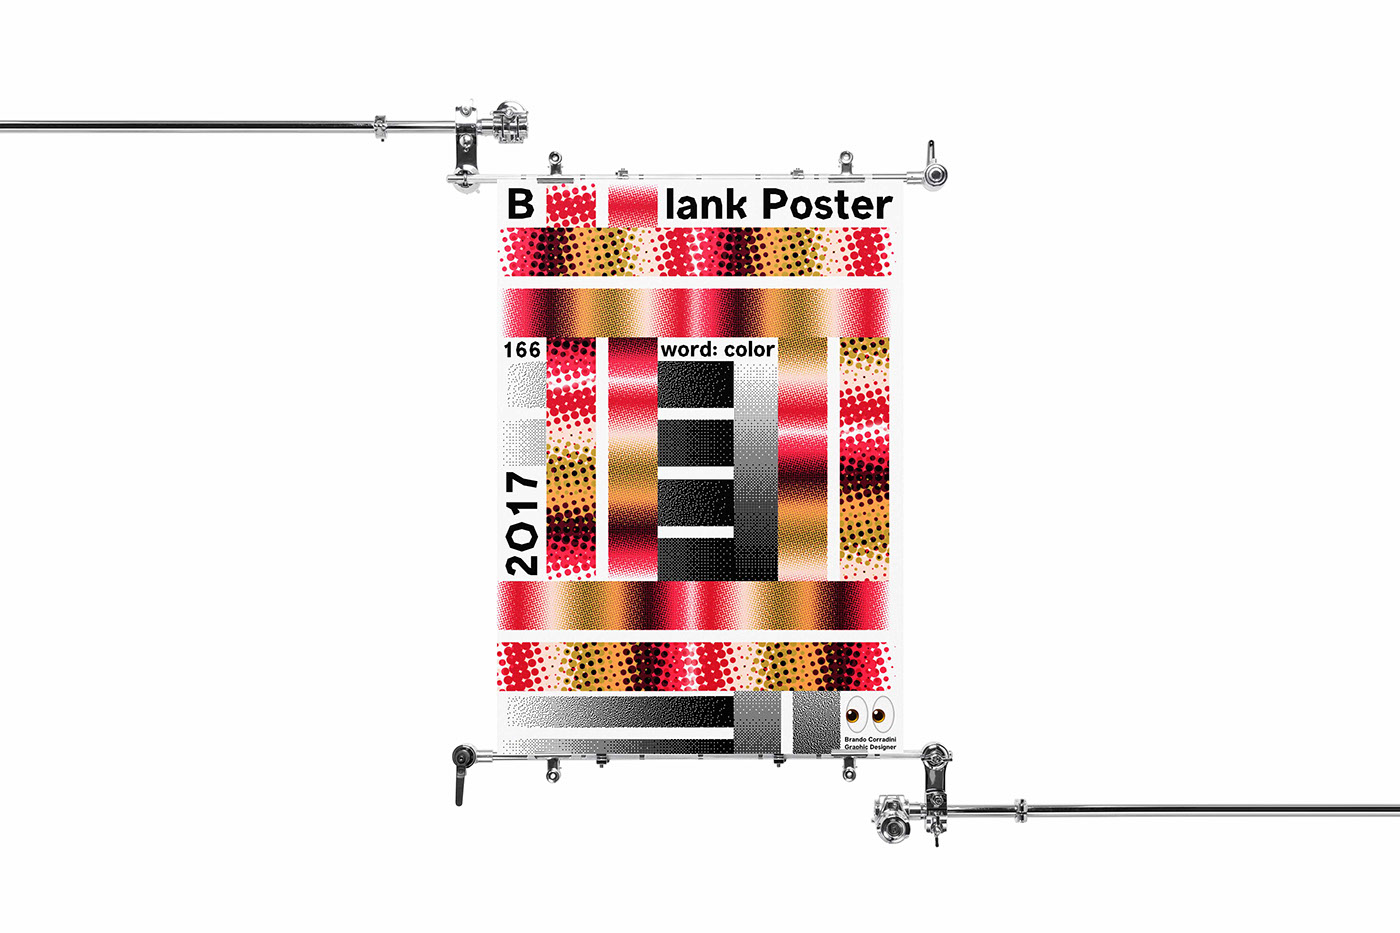 Blank Poster blankposter poster color plakat Plakate graphic design colors